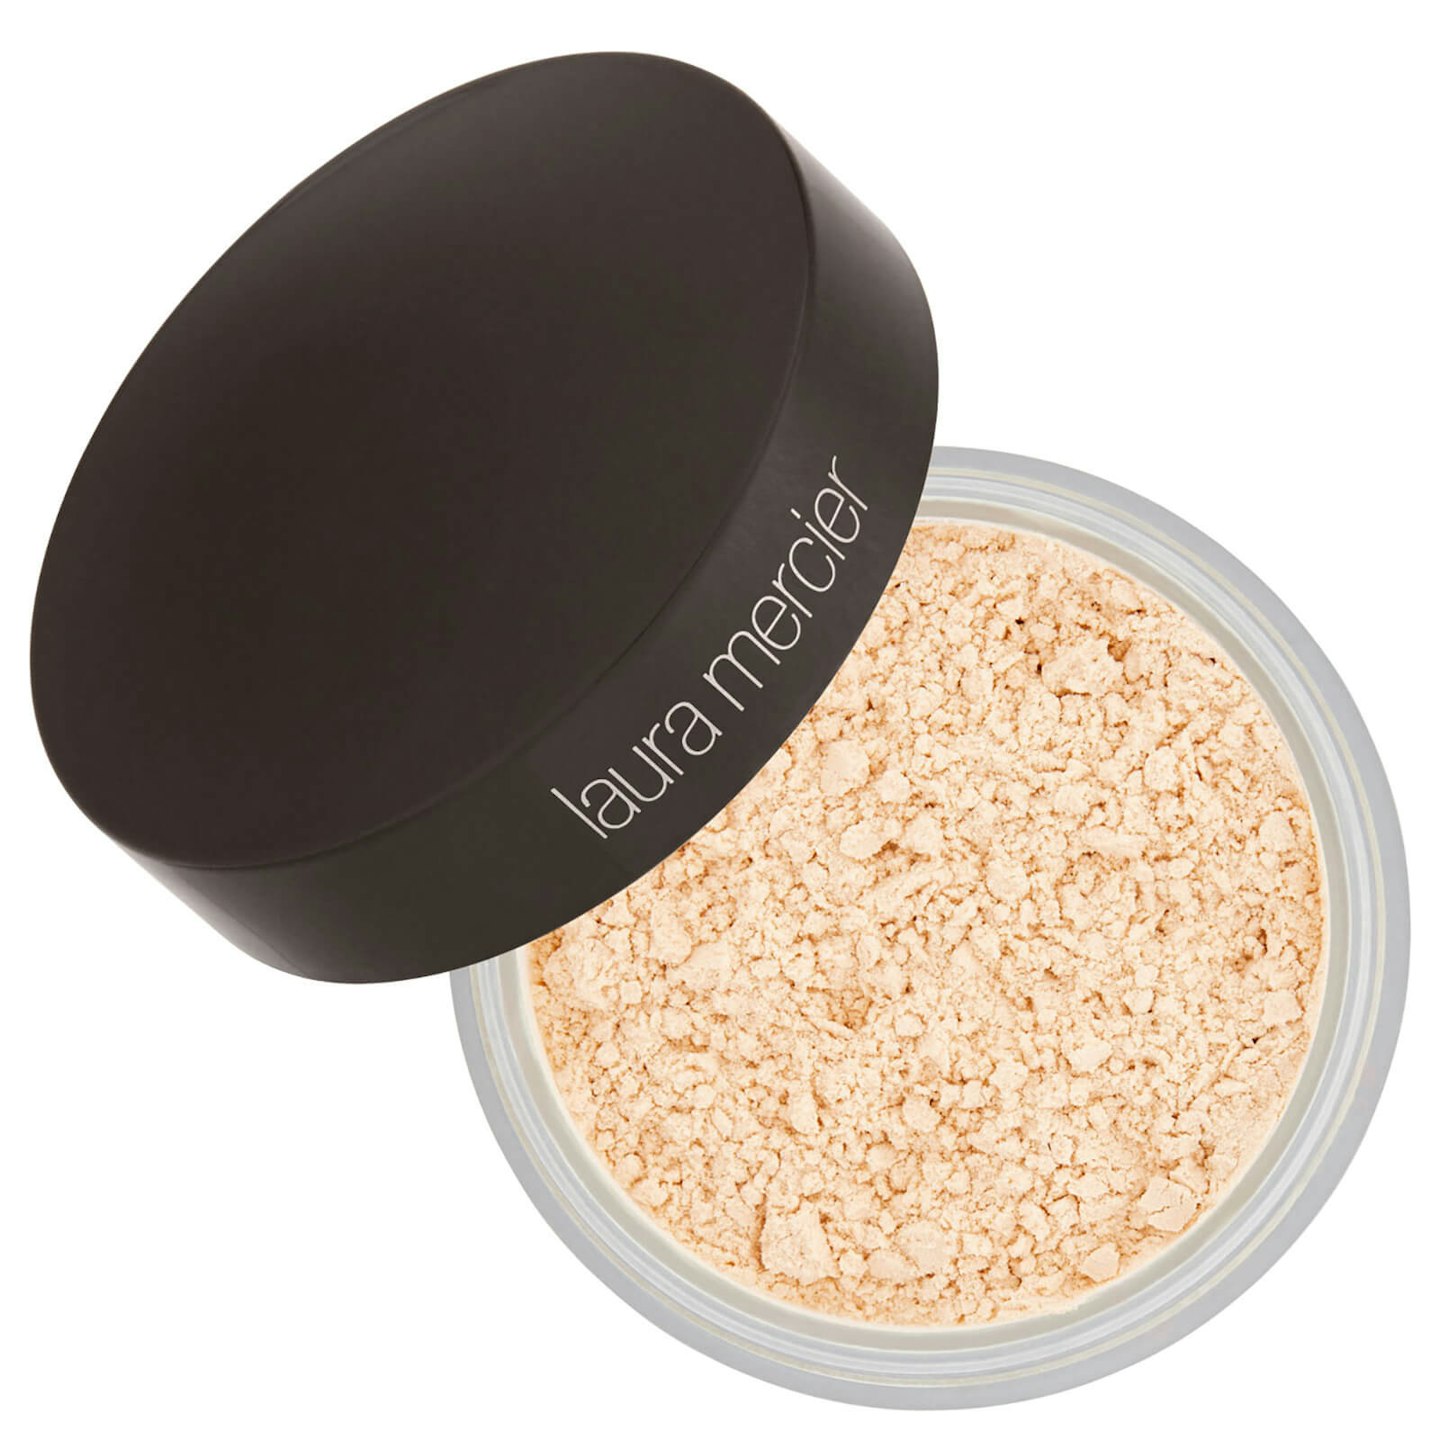 A picture of the Laura Mercier Translucent Loose Setting Powder